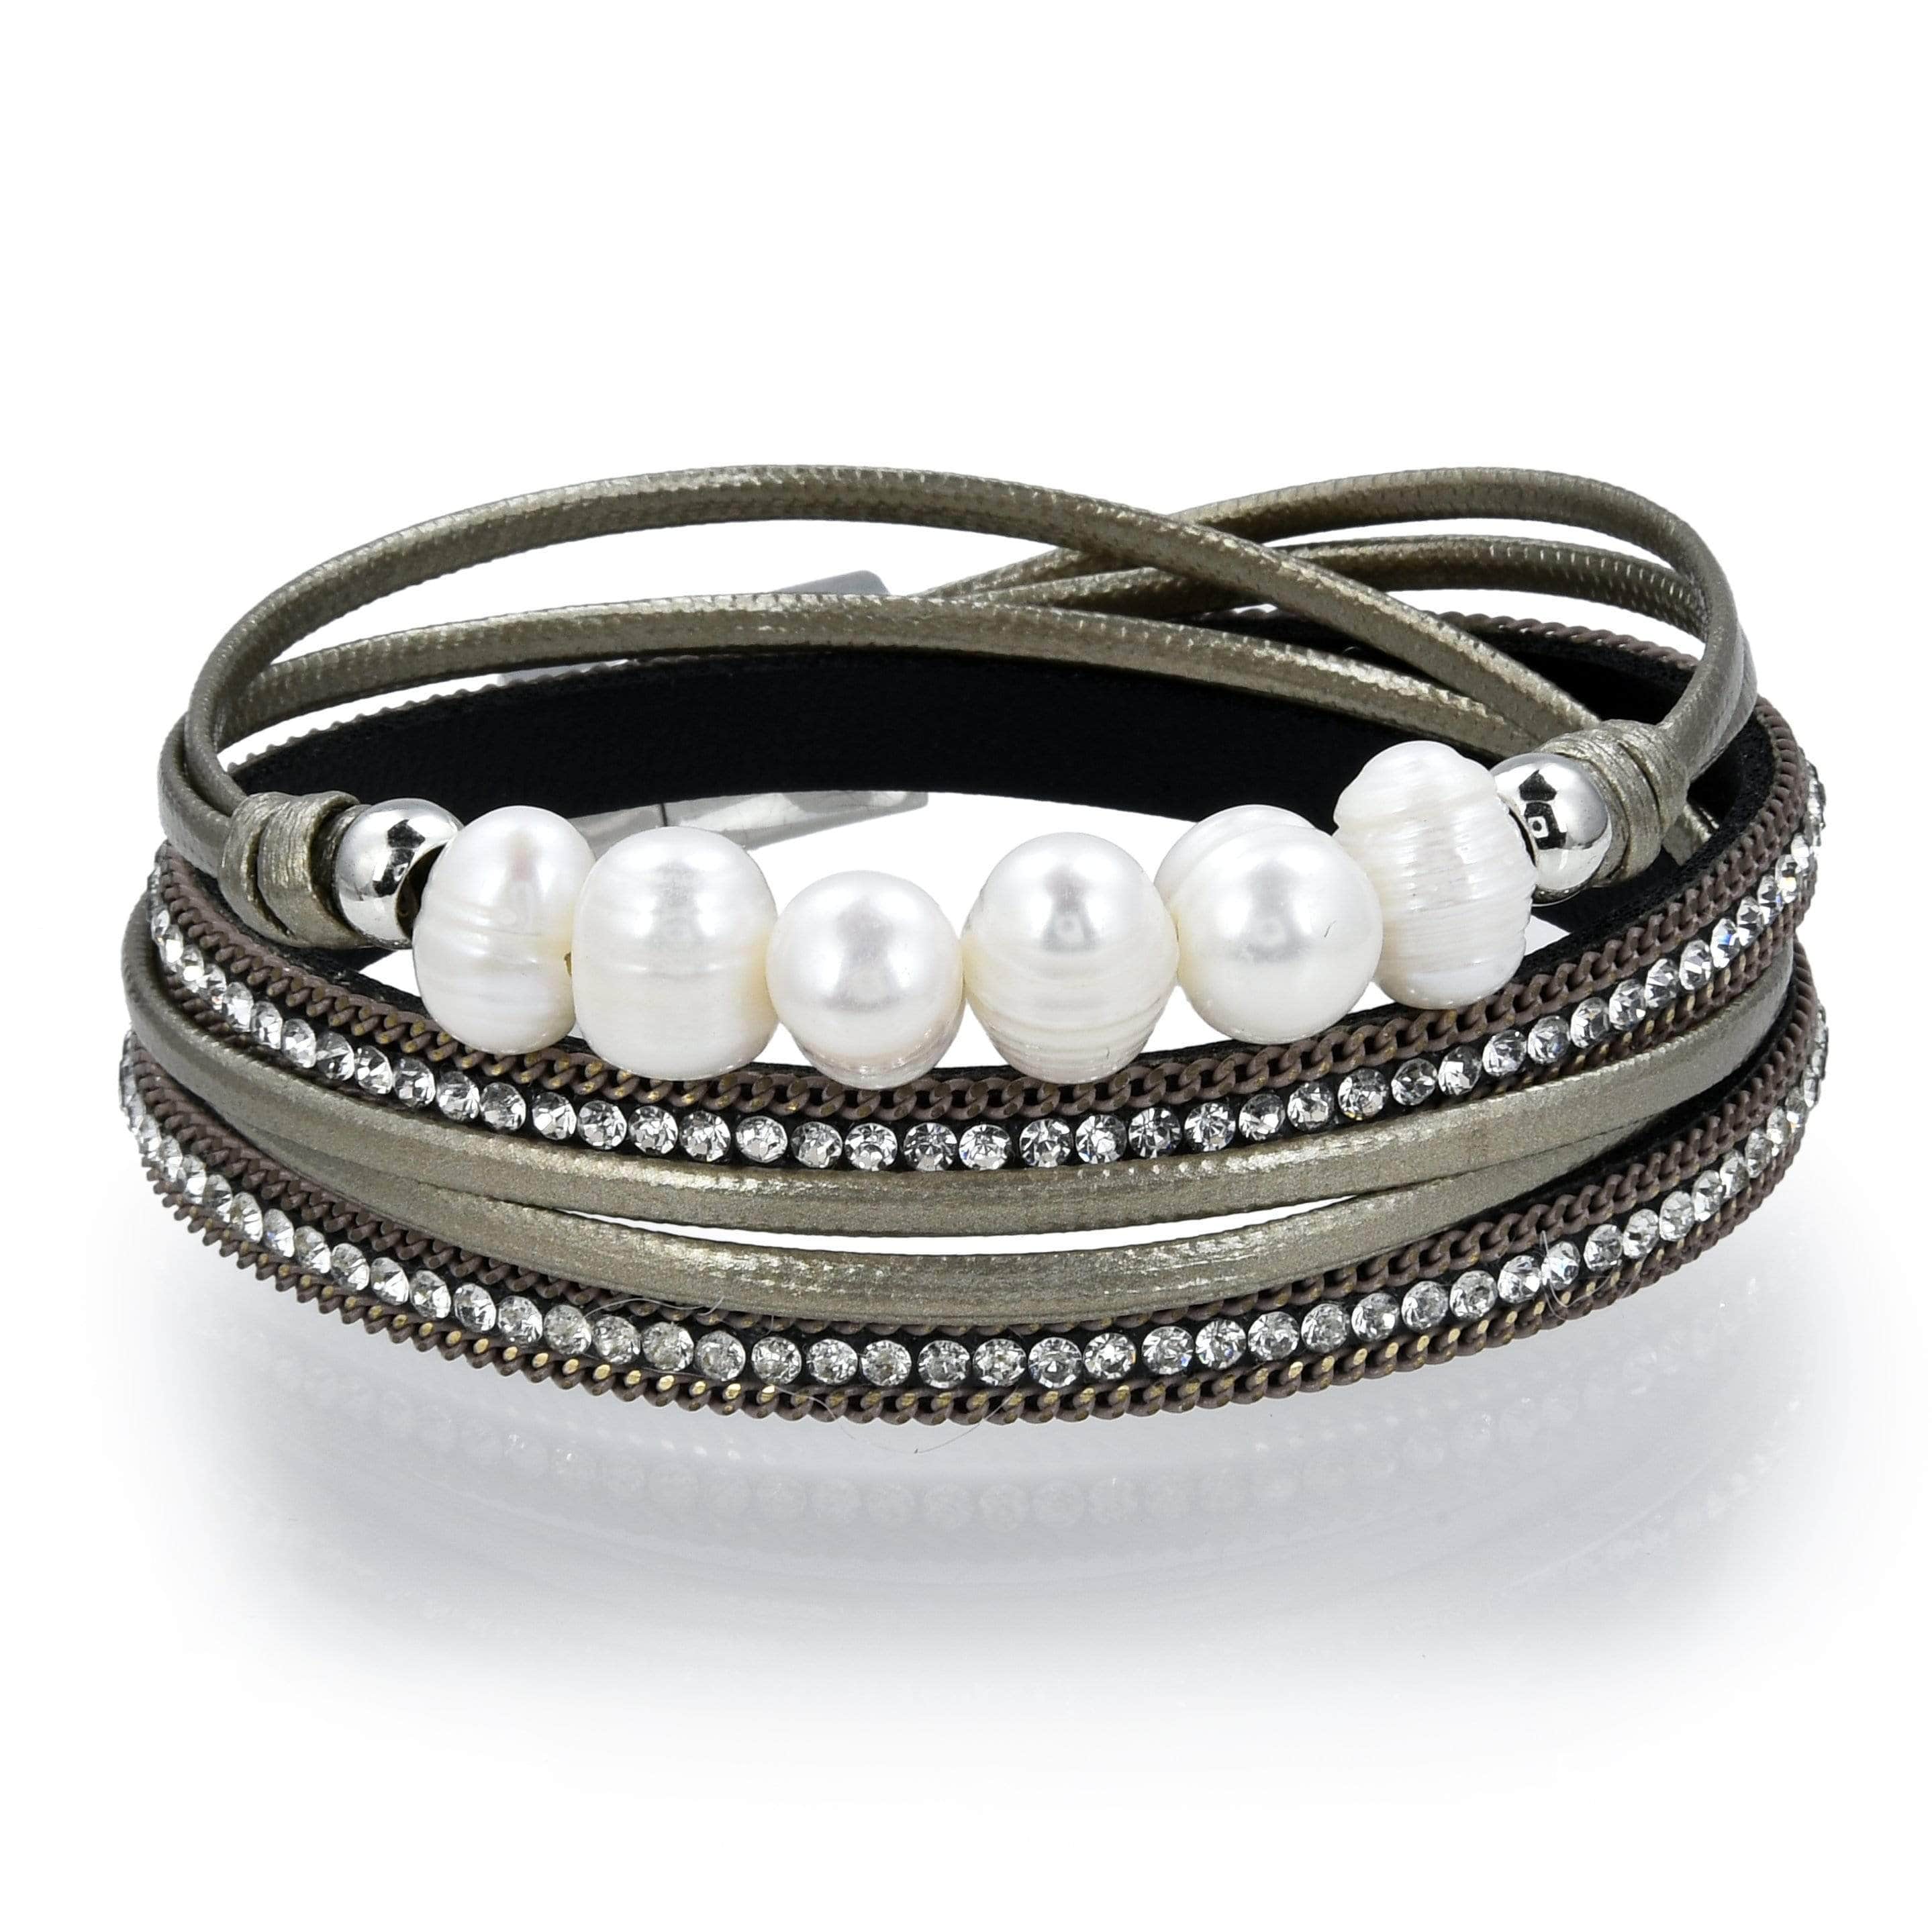 Kalifano Multiwrap Bracelets Multiple Strand Pearl and Diamonds Brown Bracelet with Magnetic Clasp BMW-20-GN2